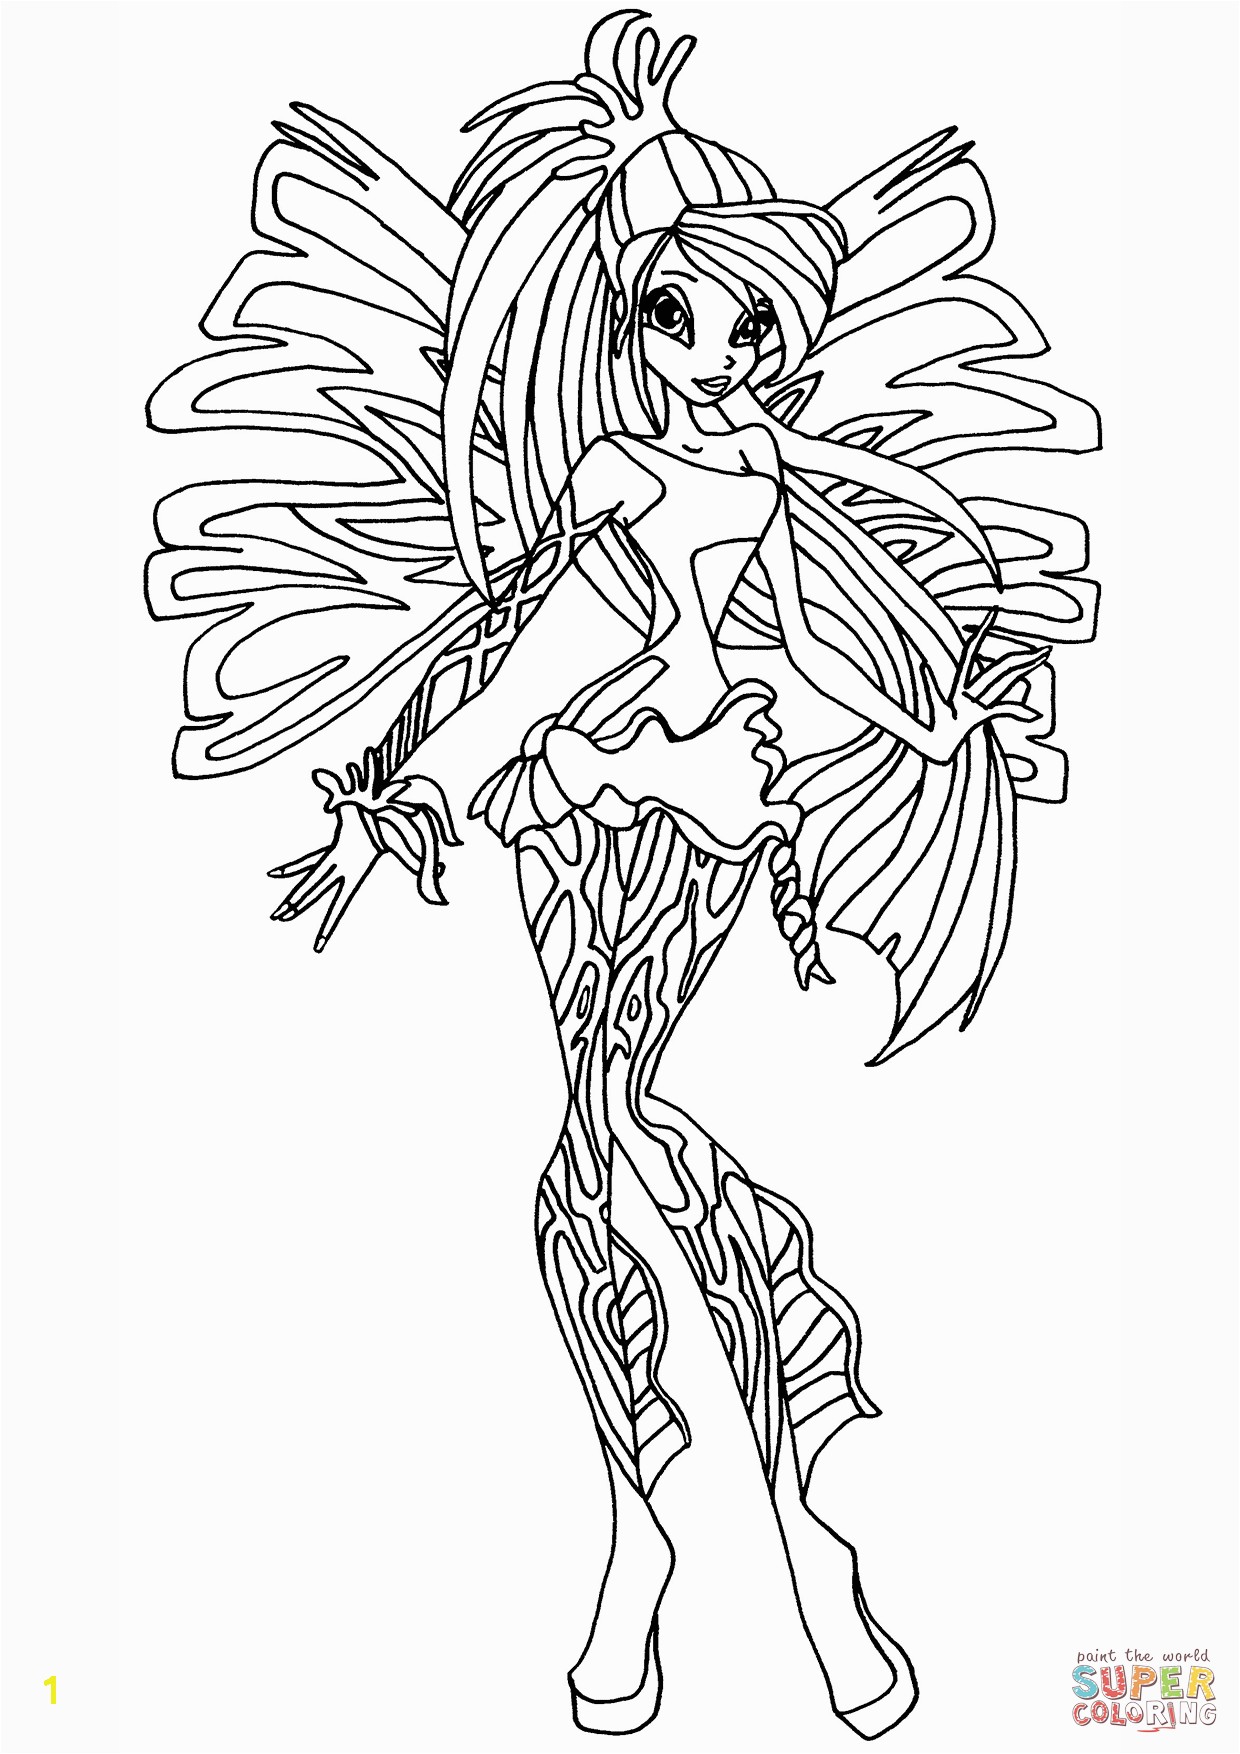 Winx Coloring Pages With Winx Club Sirenix Bloom Page